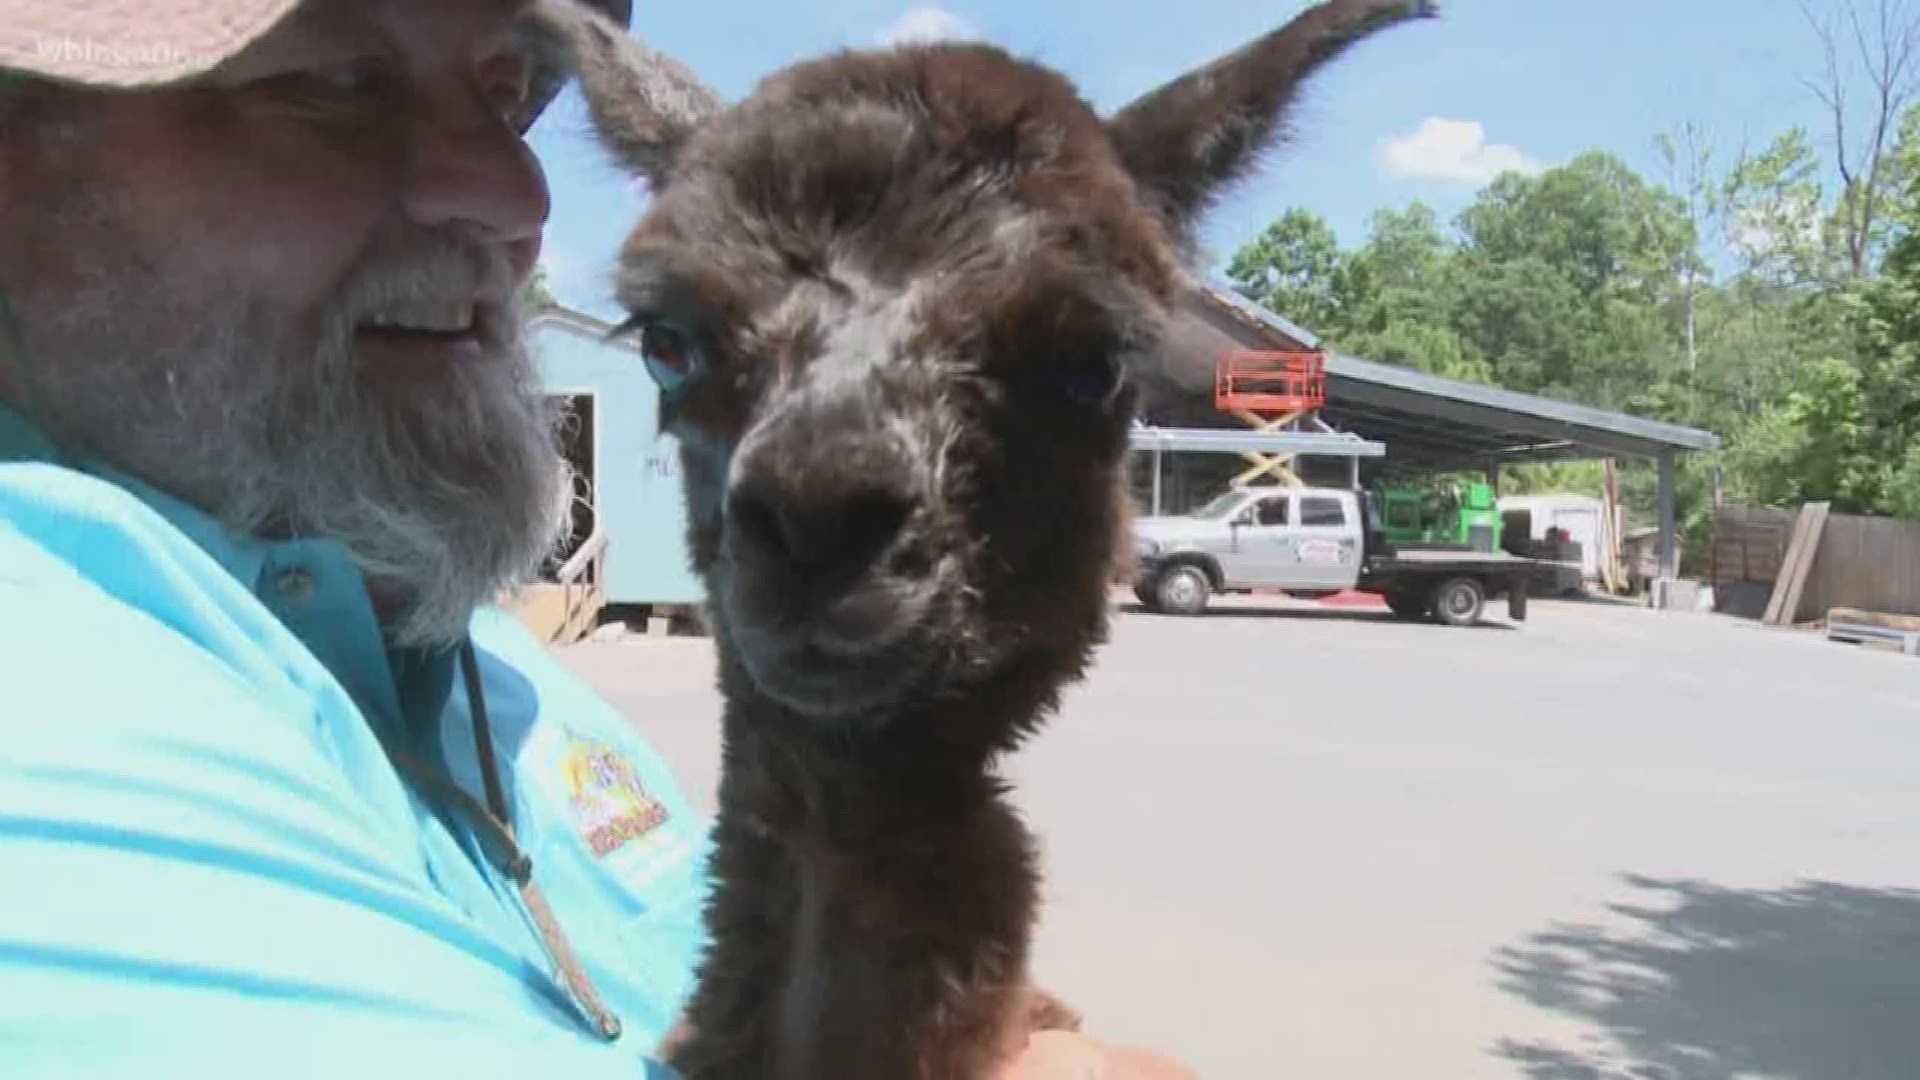 Maybelle the Alpaca had a rough start but is now thriving thanks to love and support from a local Veterinarian and Little Ponderosa Zoo in Clinton.May 24, 2018-4pm